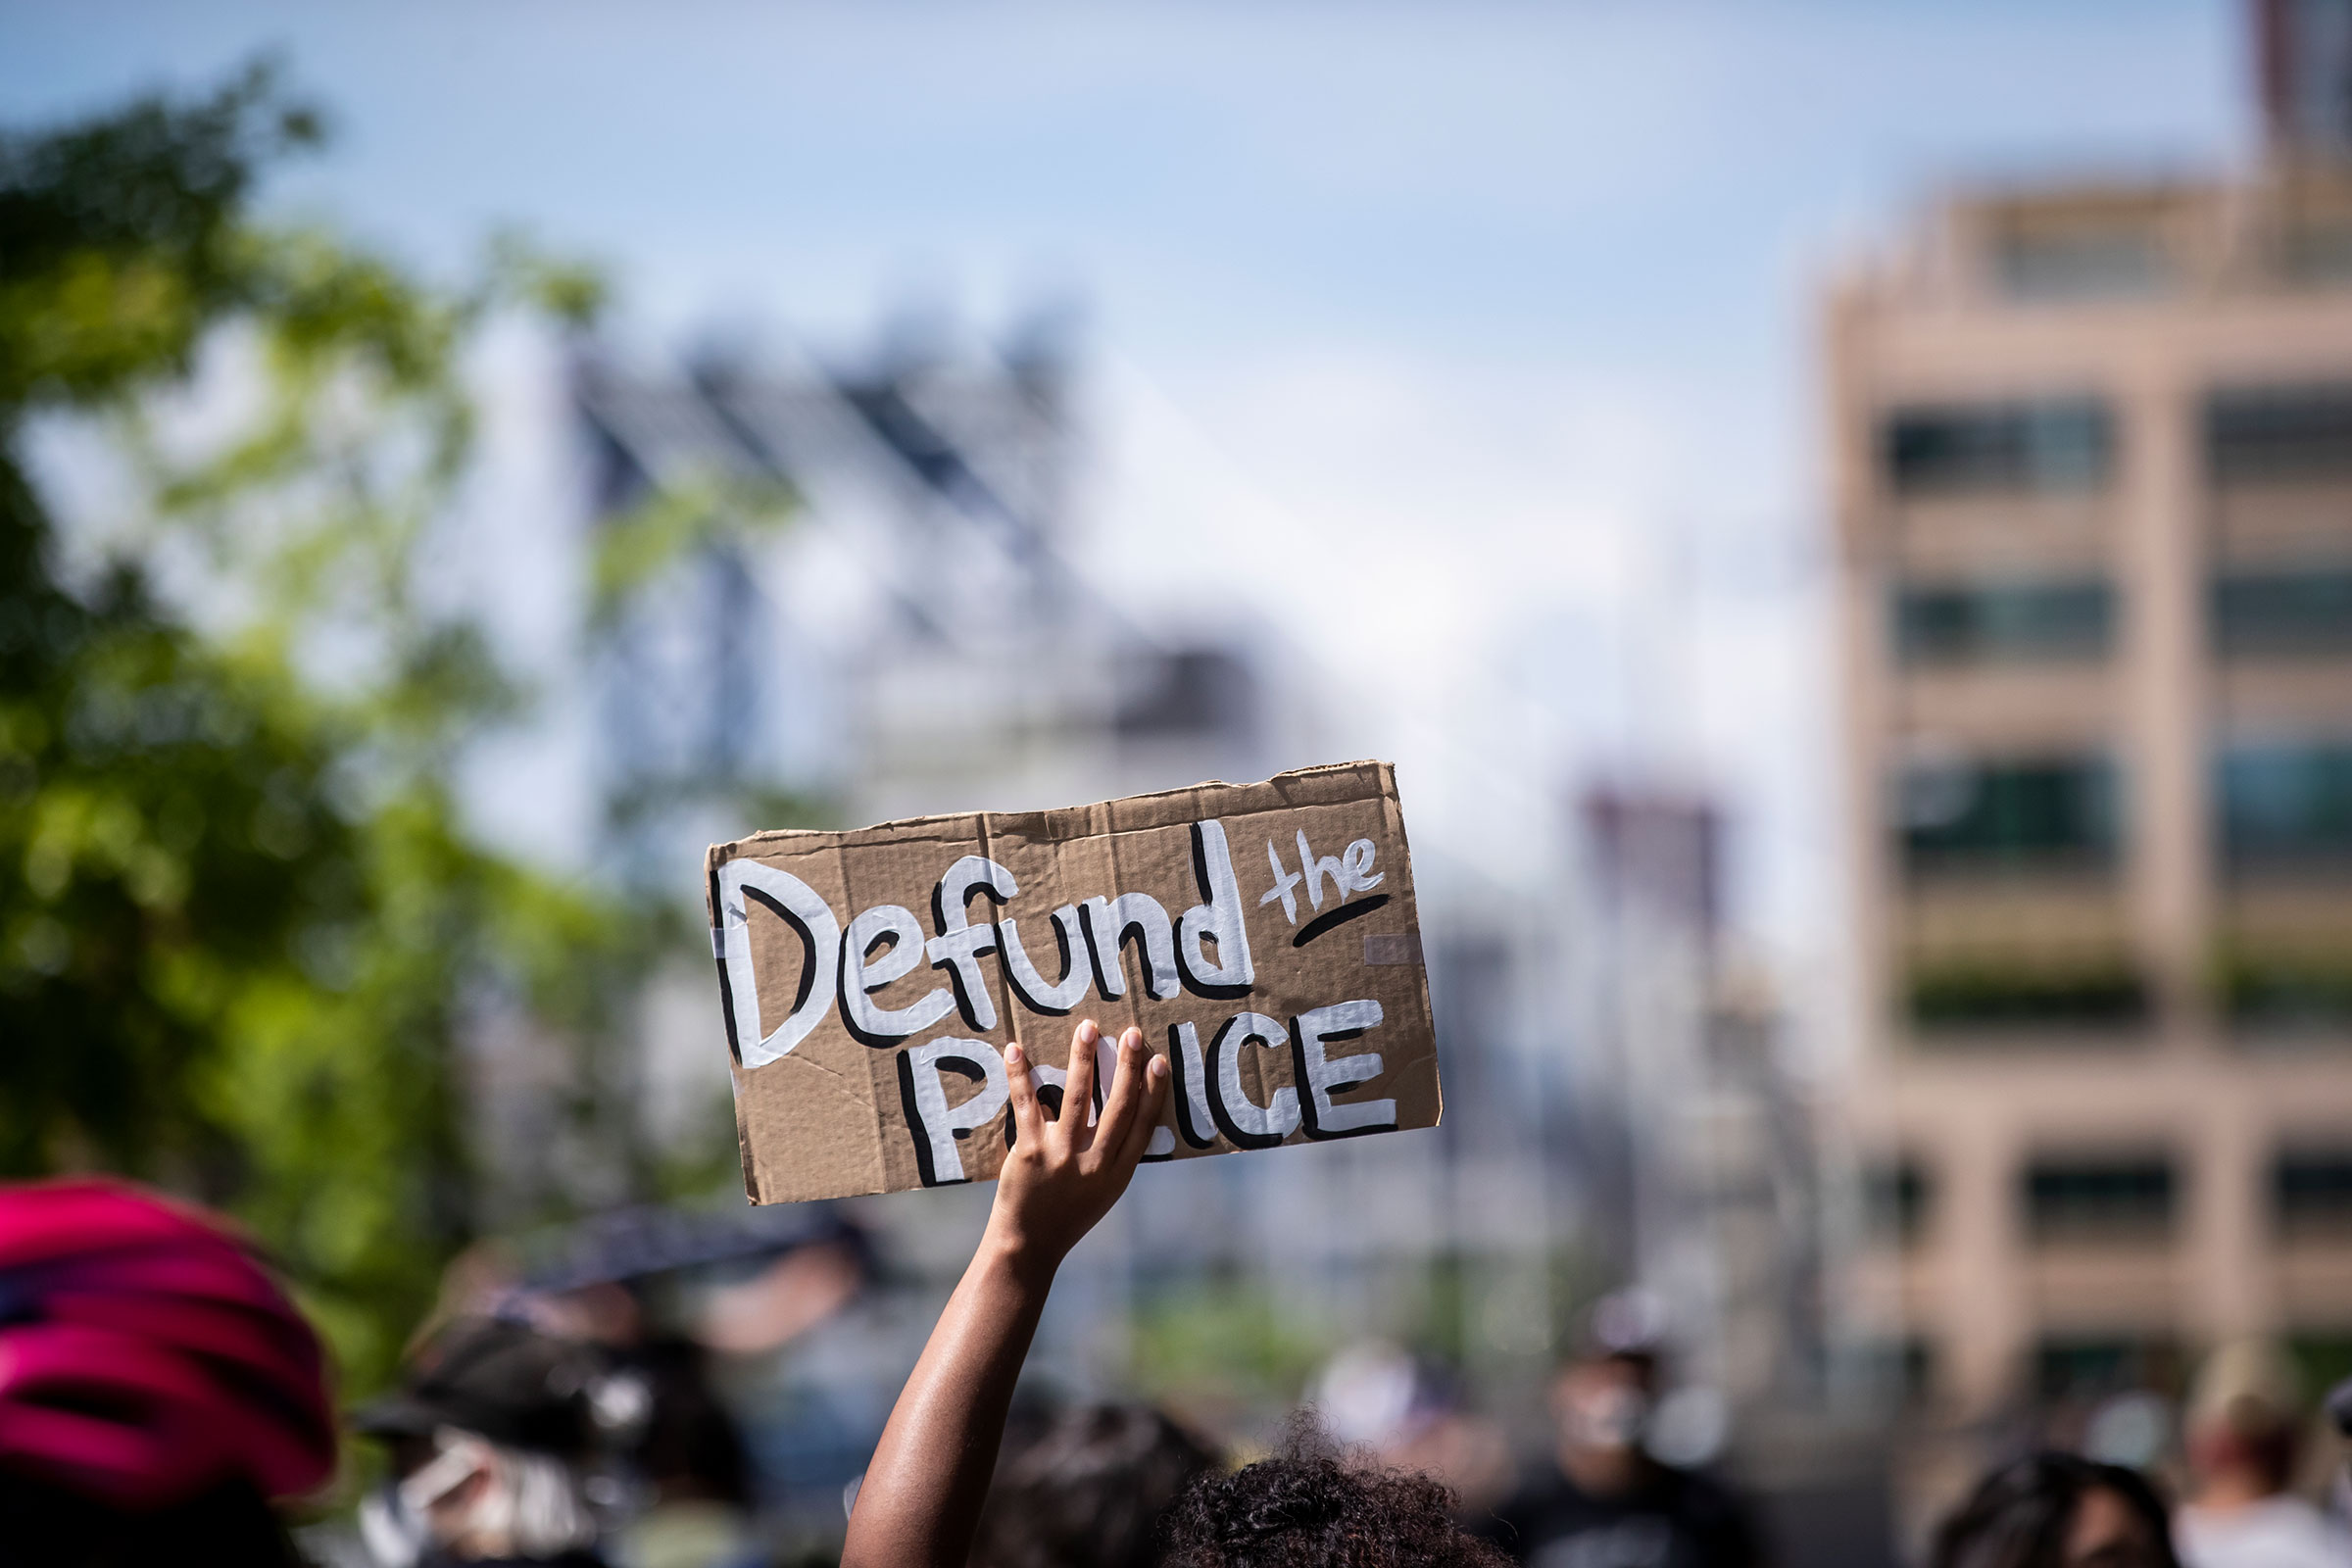 A protester holds up a homemade sign that says, "Defund the Police" during a peaceful protest in New York City June 19, 2020.